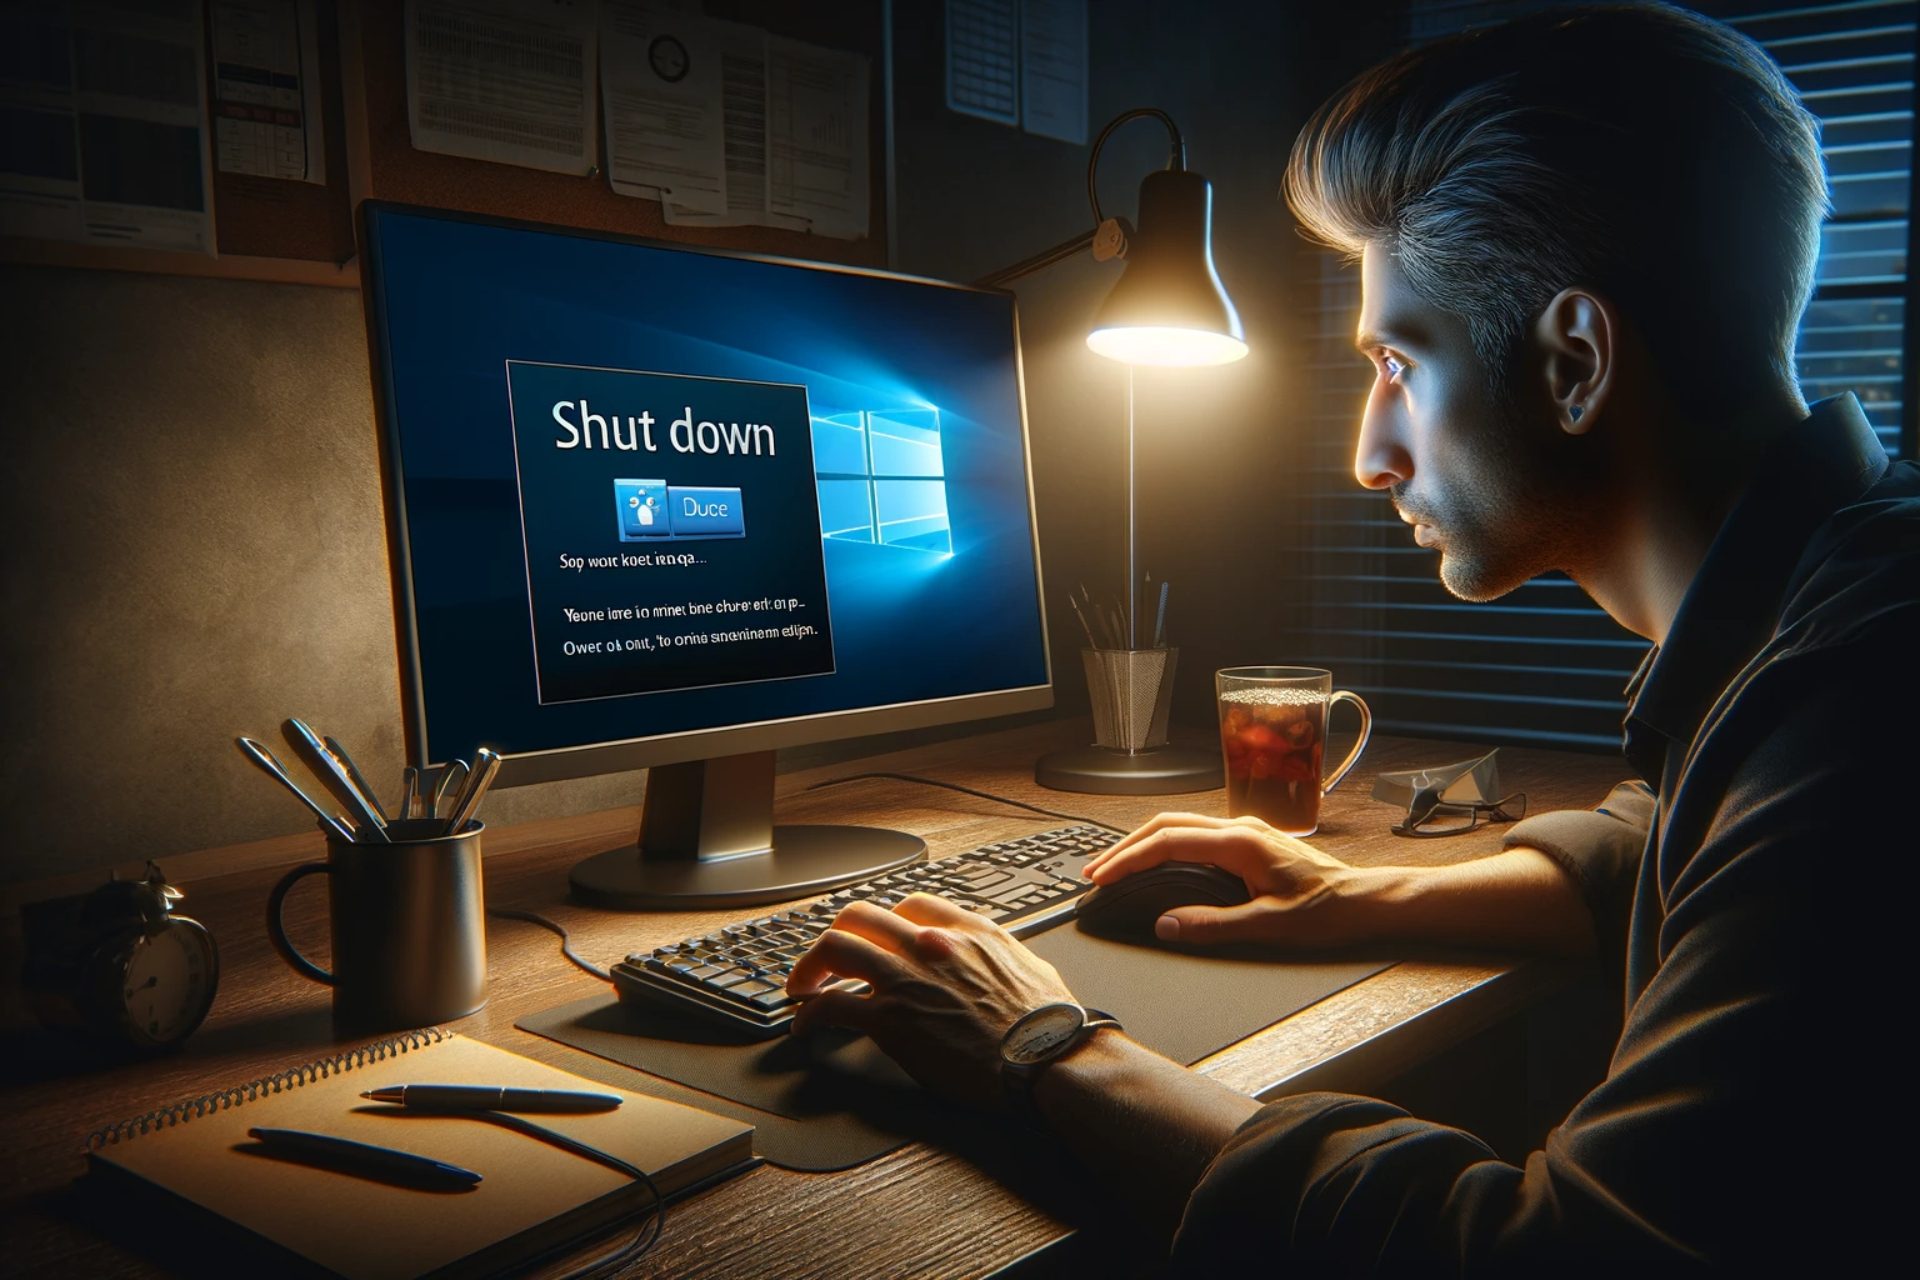 Should I Shut Down my PC Every Night? Pros & Cons